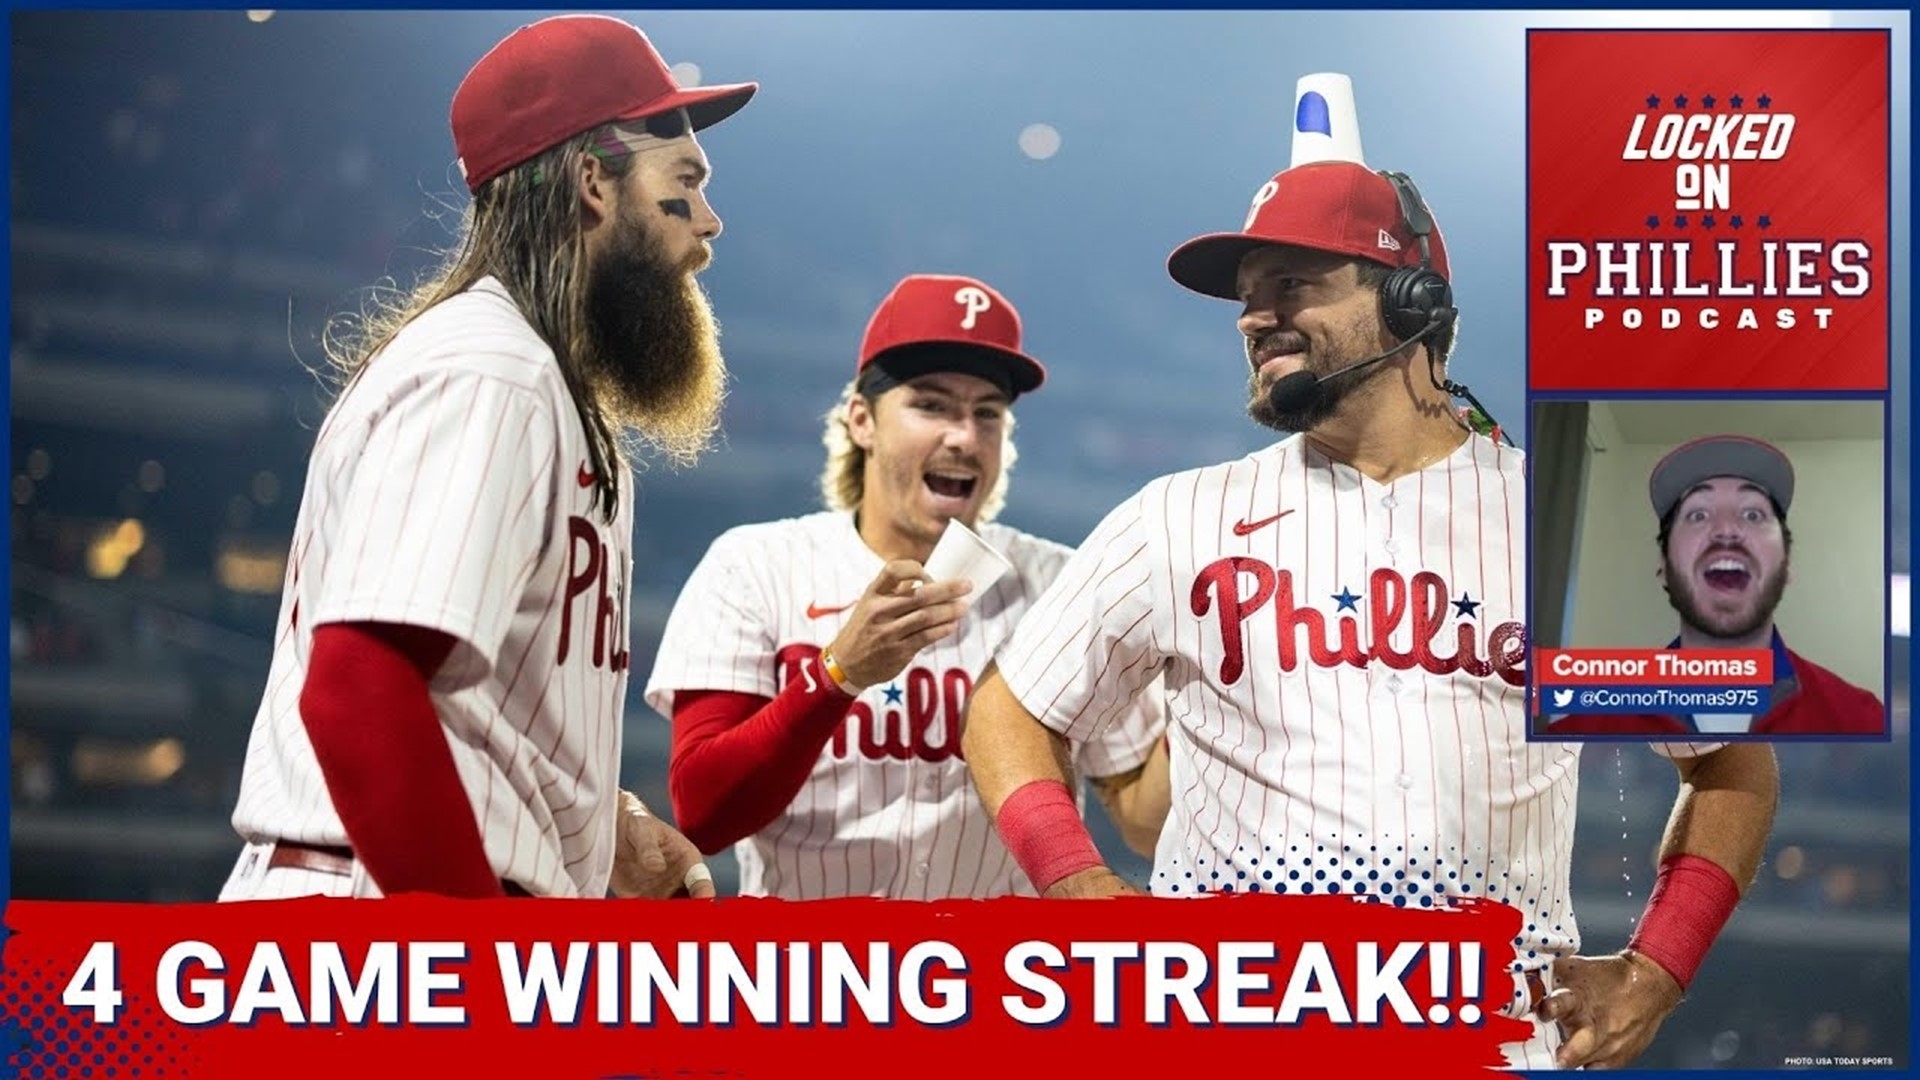 In today's episode, Connor reacts to the Philadelphia Phillies' current 4 game winning streak and their 2 wins so far this series against the Detroit Tigers!